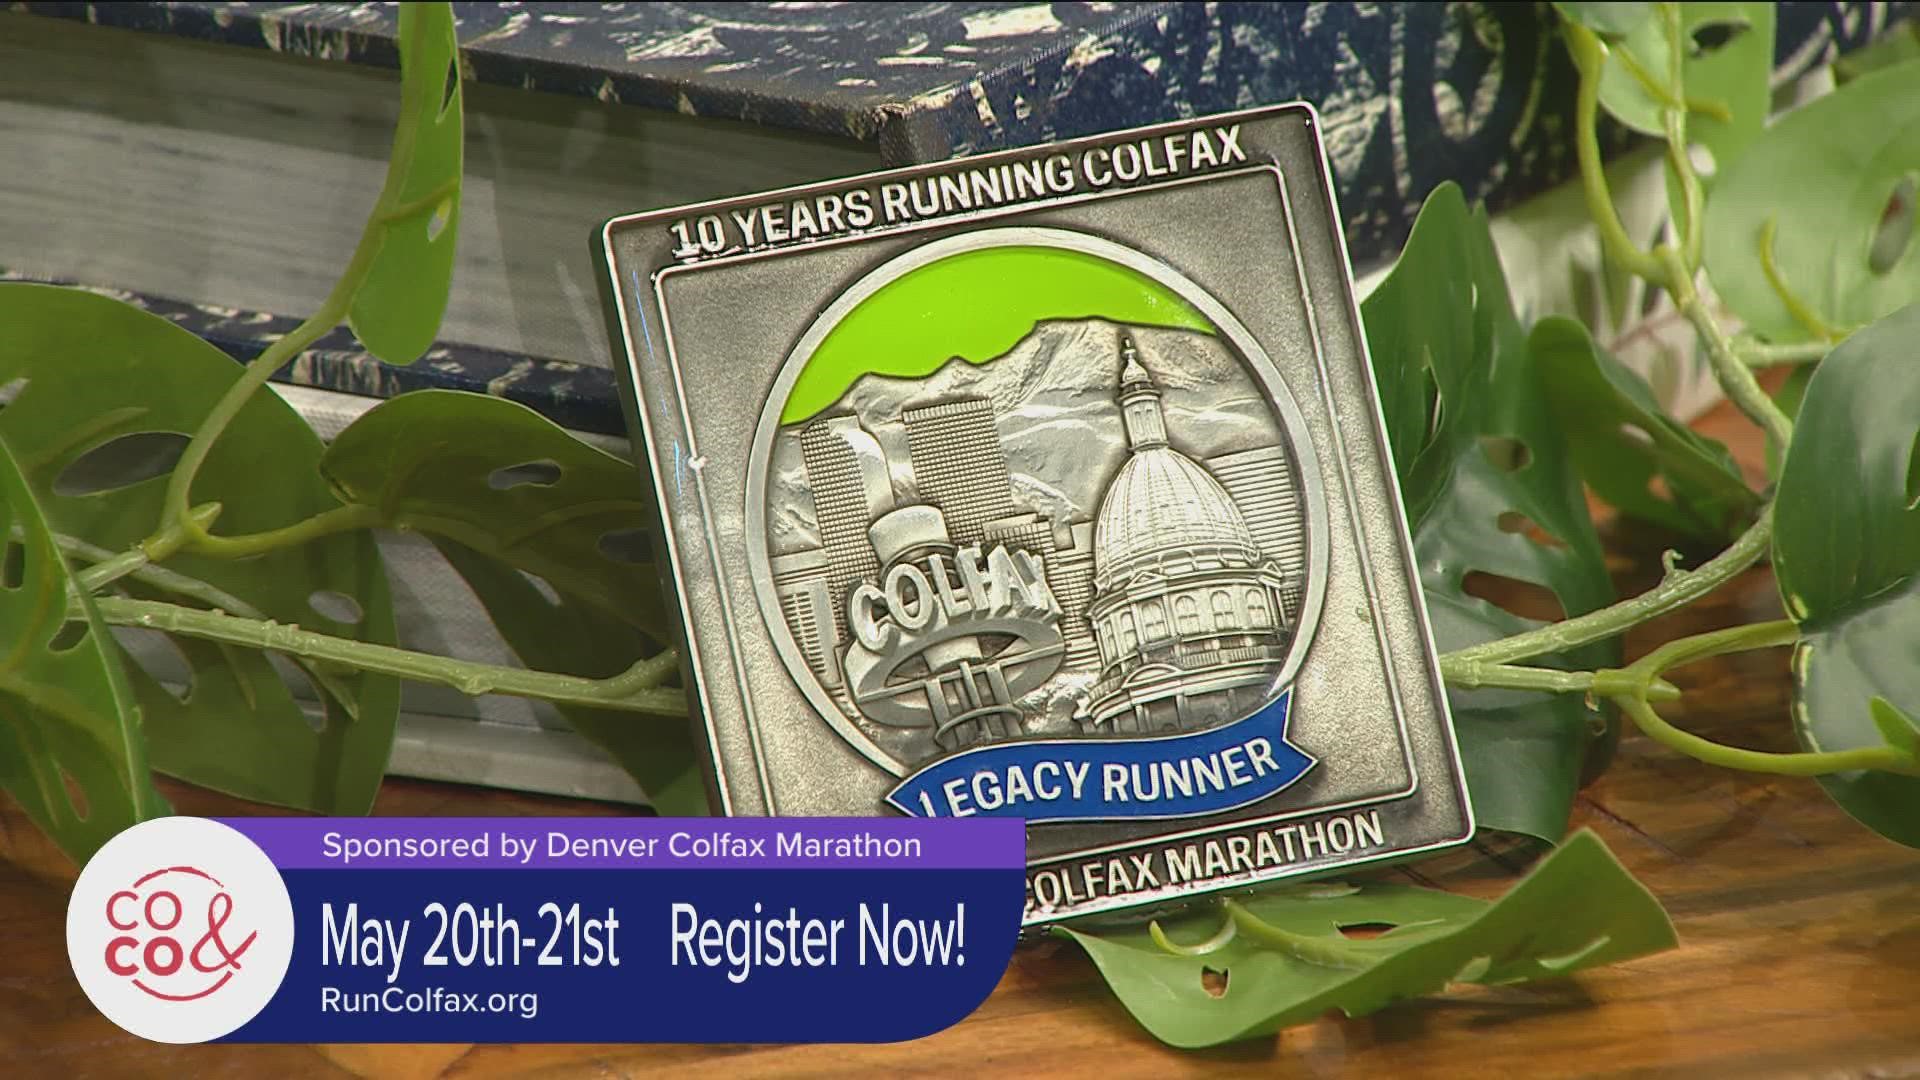 The Colfax Marathon takes in May. Register now before the price goes up! Learn more at RunColfax.org. **PAID CONTENT**